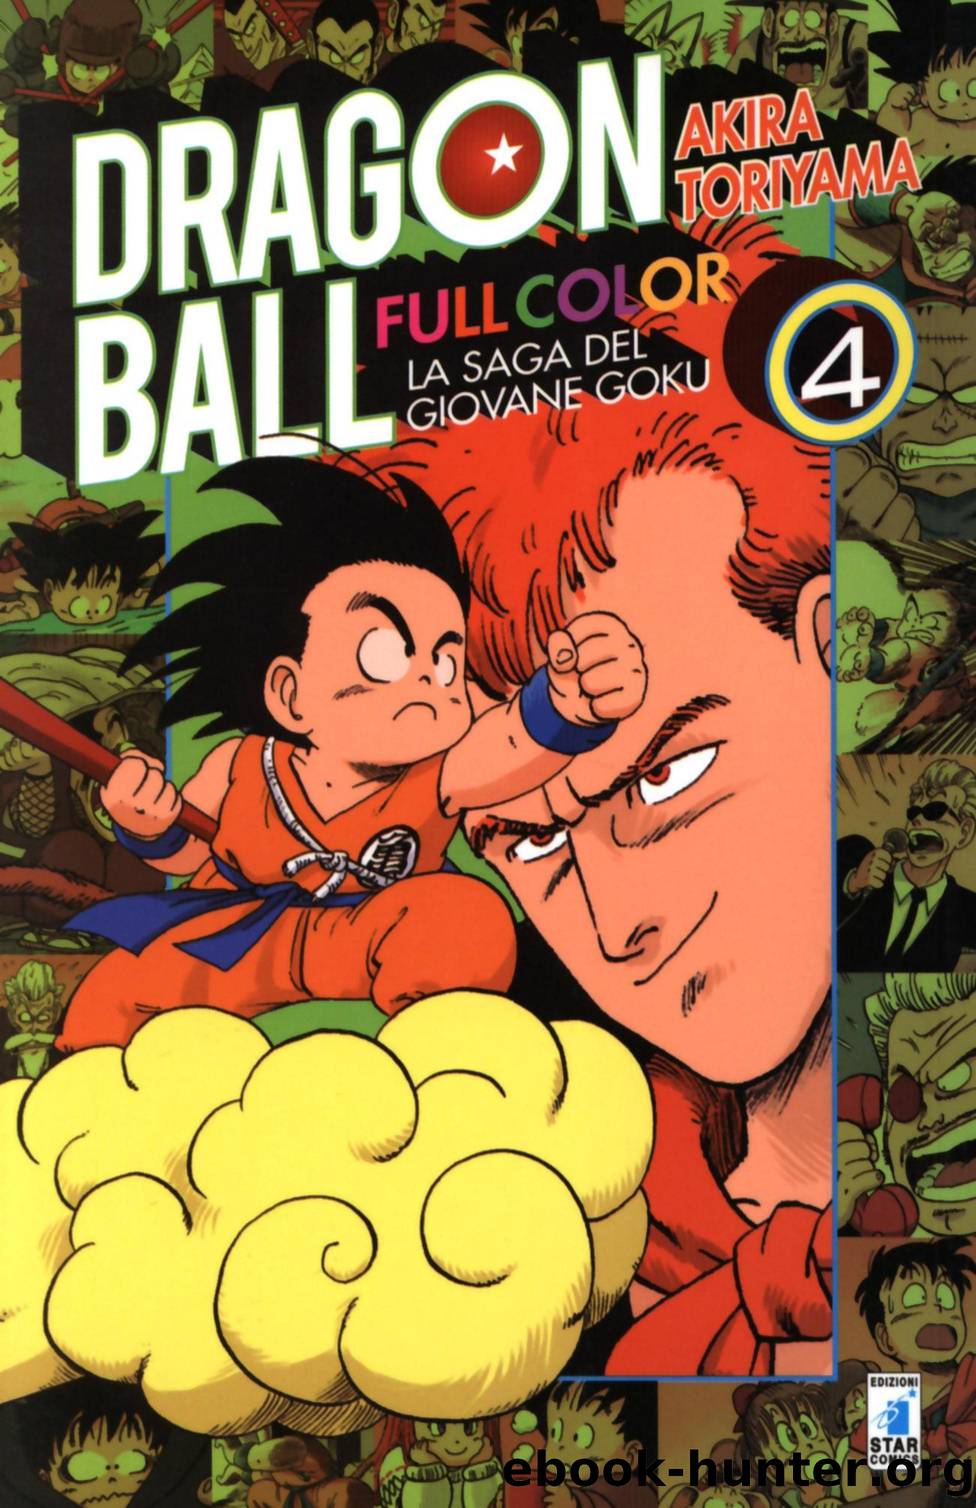 Dragon Ball Full Color [Volume 4] by Unknown